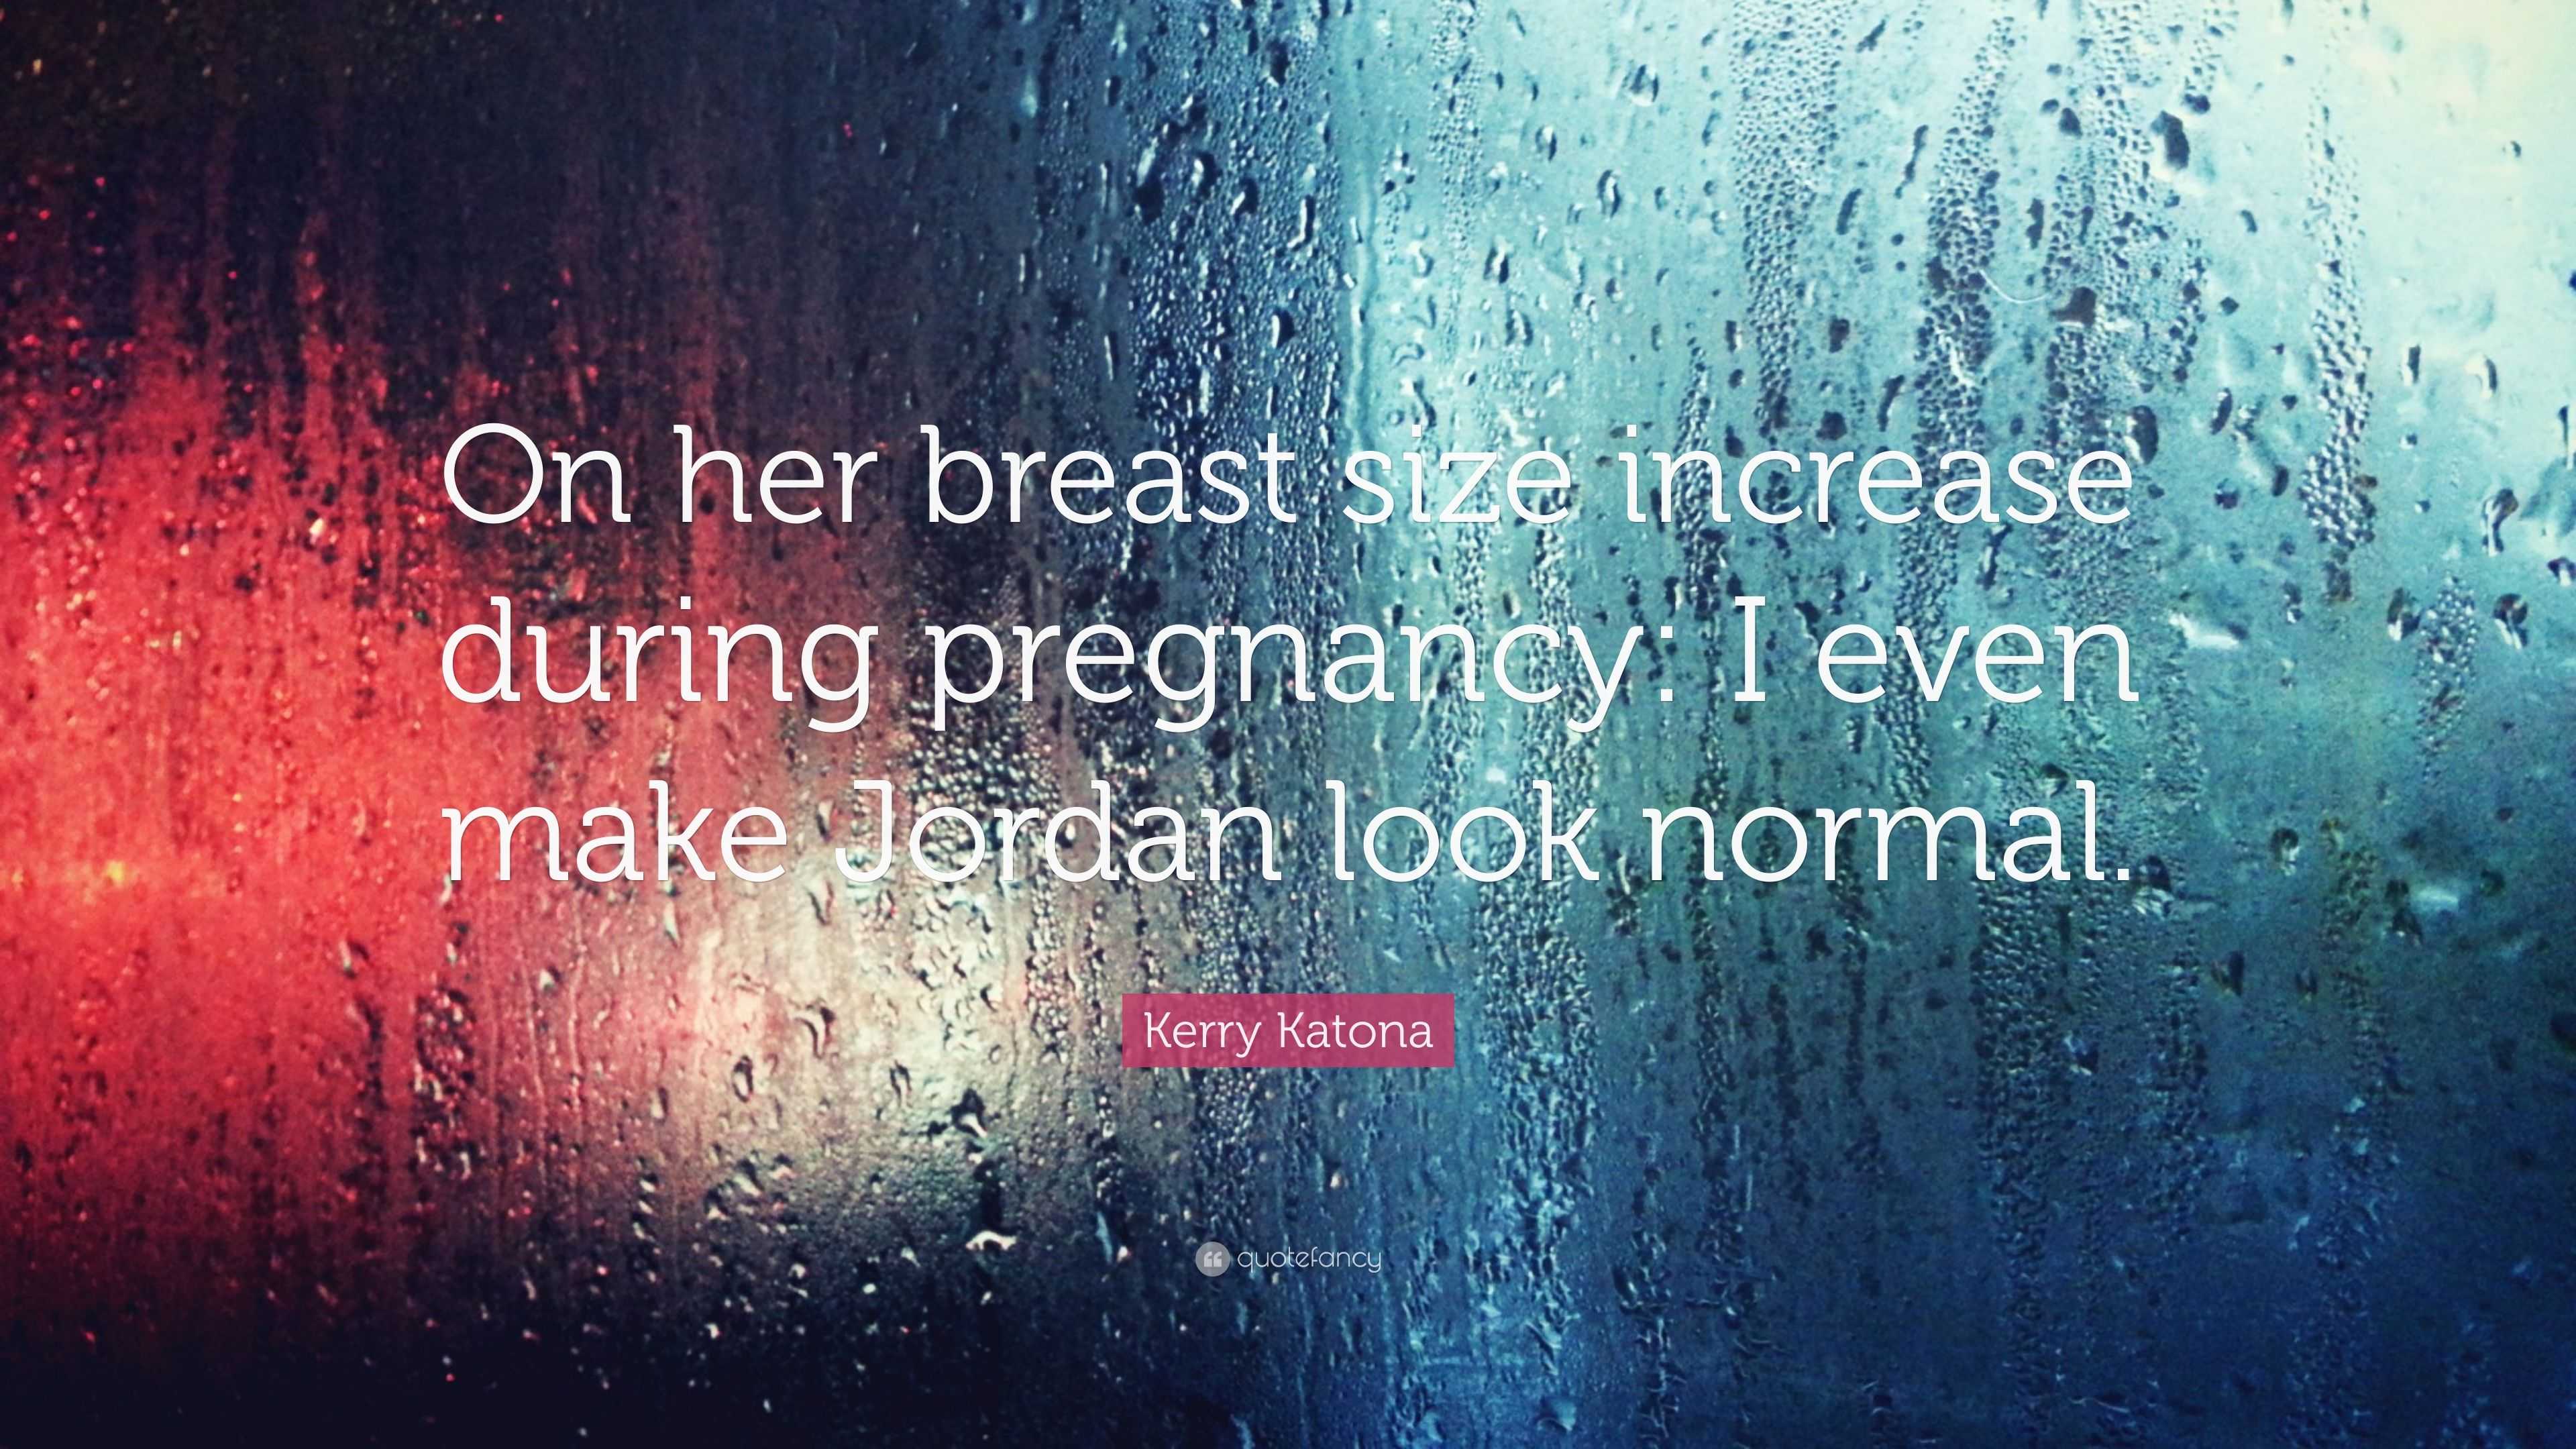 https://quotefancy.com/media/wallpaper/3840x2160/6058674-Kerry-Katona-Quote-On-her-breast-size-increase-during-pregnancy-I.jpg